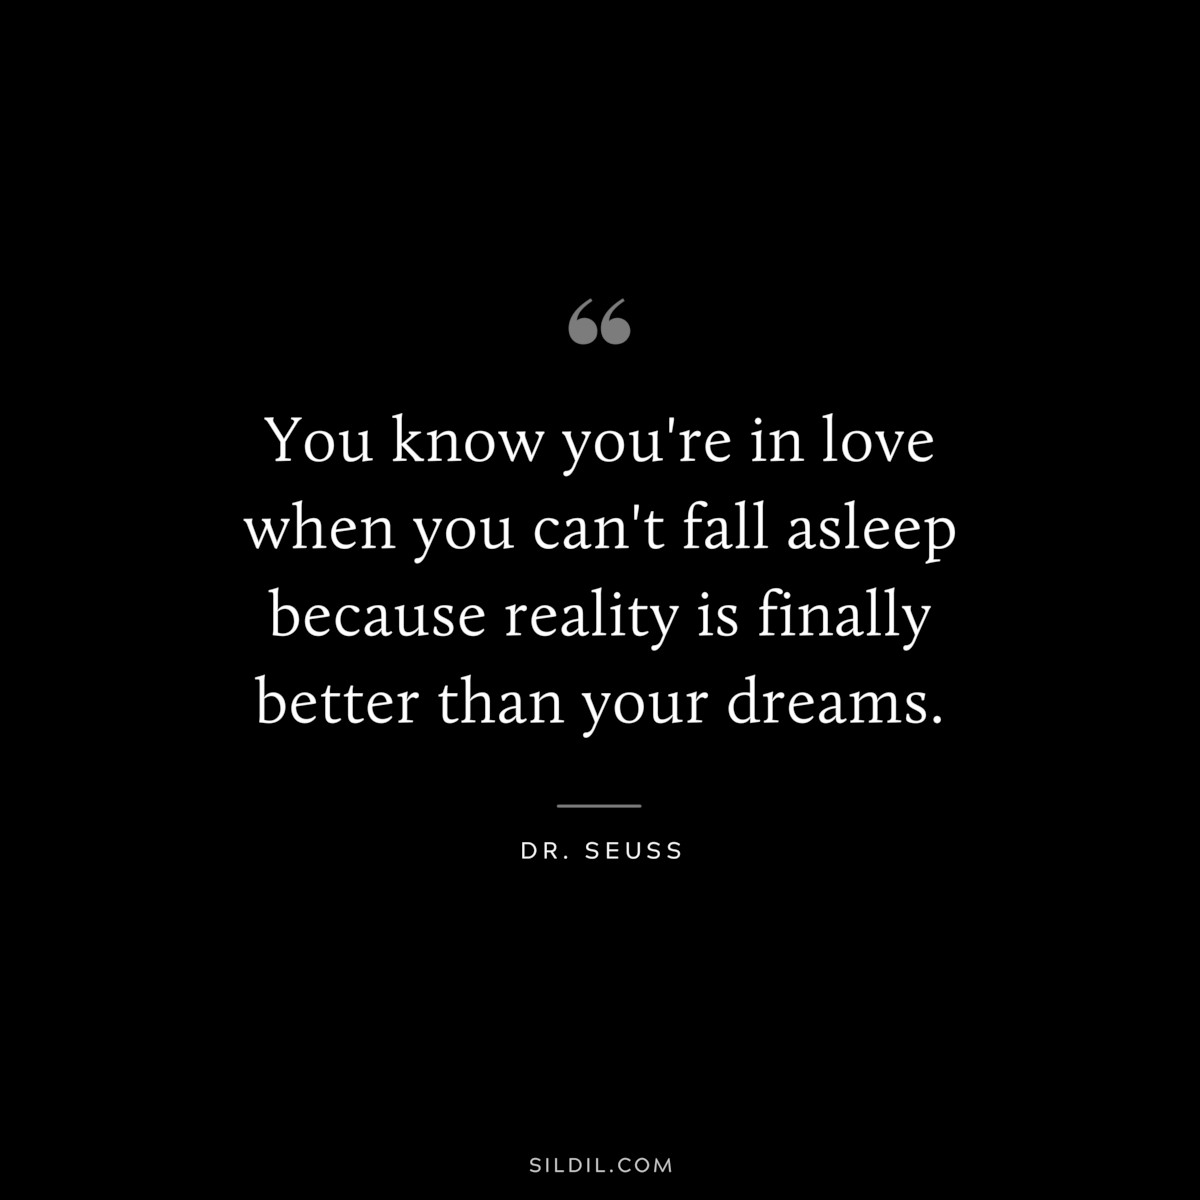 You know you're in love when you can't fall asleep because reality is finally better than your dreams. ― Dr. Seuss